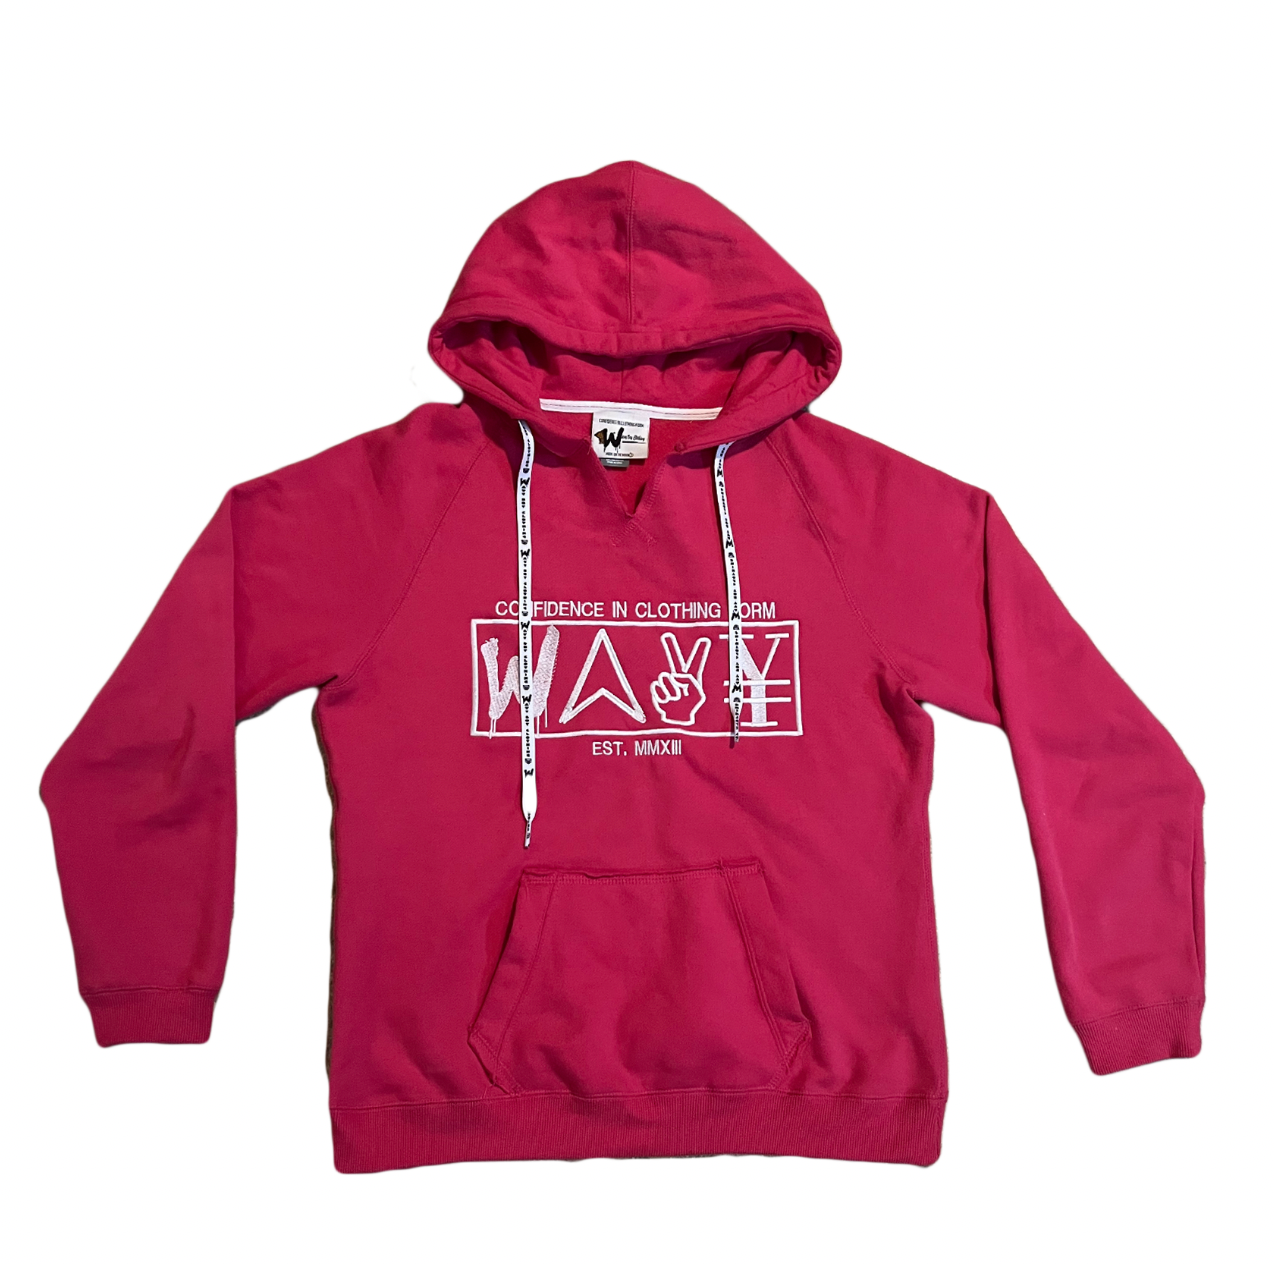 V Neck Hoodie , Embroidered, Wavy Boy Clothing, Unisex Hoodie, Streetwear Brand, Wavy Boy Clothing, Dope Hoodie, Different Hoodie, Luxury Hoodie, High Fashion Hoodie, New Wave, @wavyboyclothing , Streetwear, Women's clothing, Women's Hoodie, CONFIDENCE in CLOTHING form, spring fashion, 